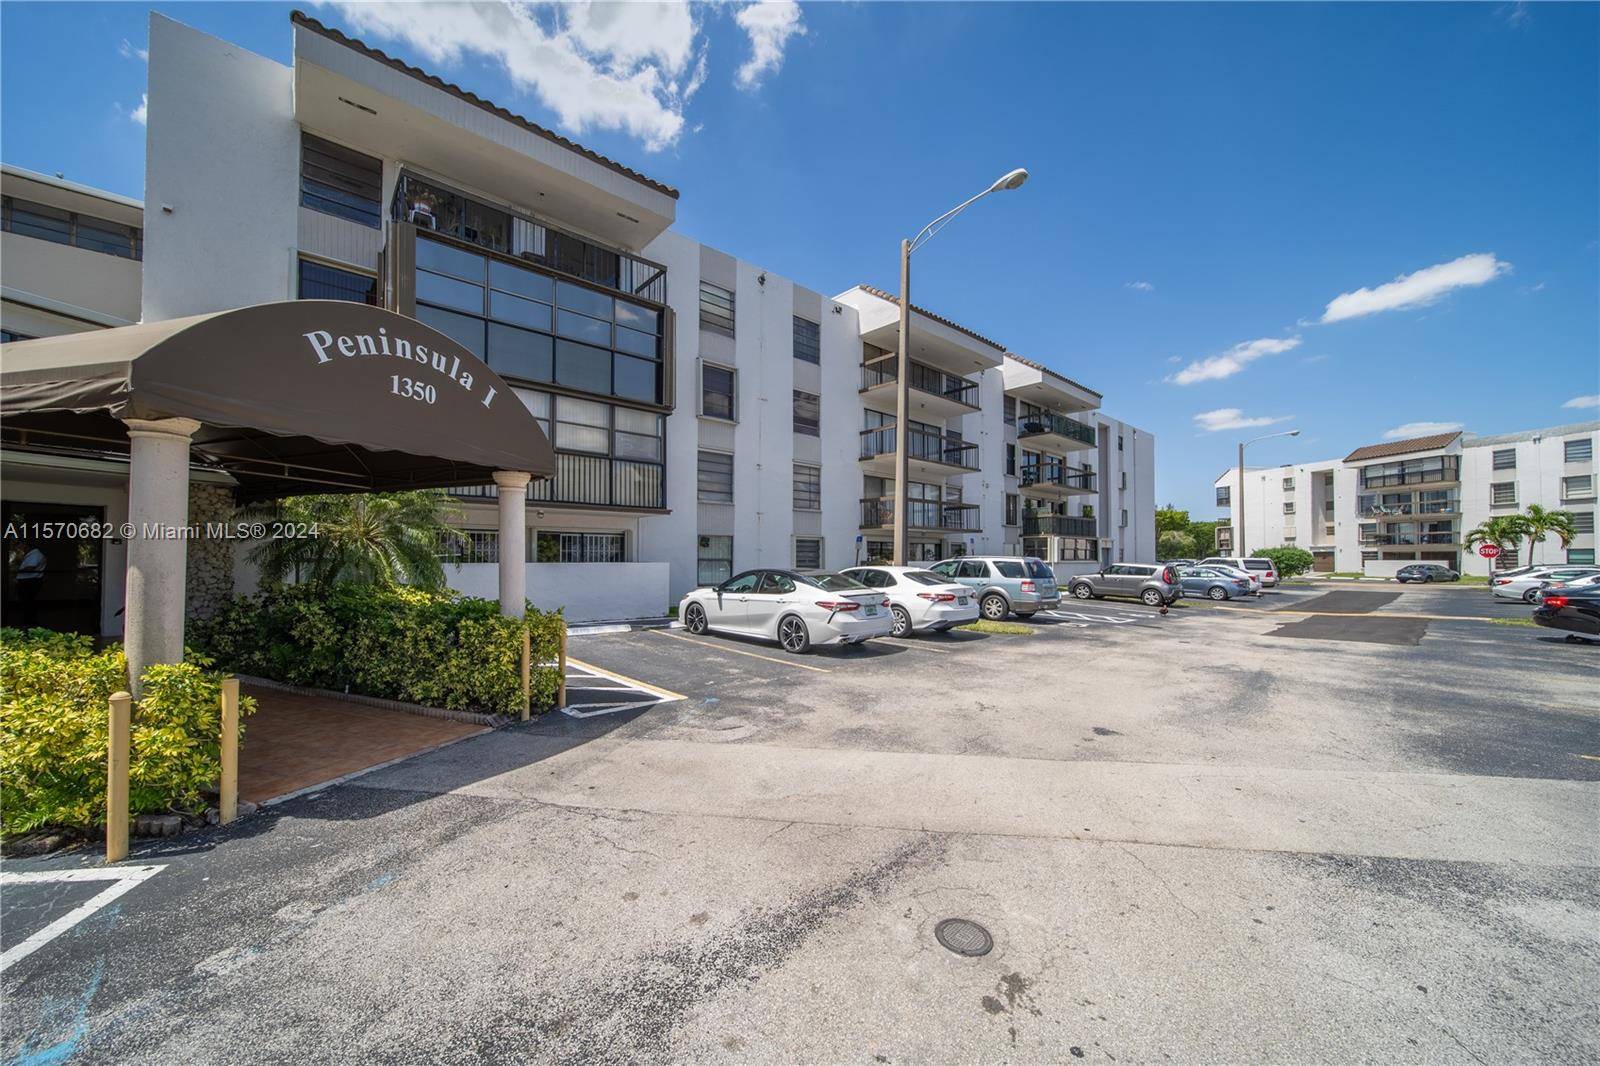 Welcome to this exquisite two bedroom, two bathroom residence nestled in the vibrant heart of Kendall.